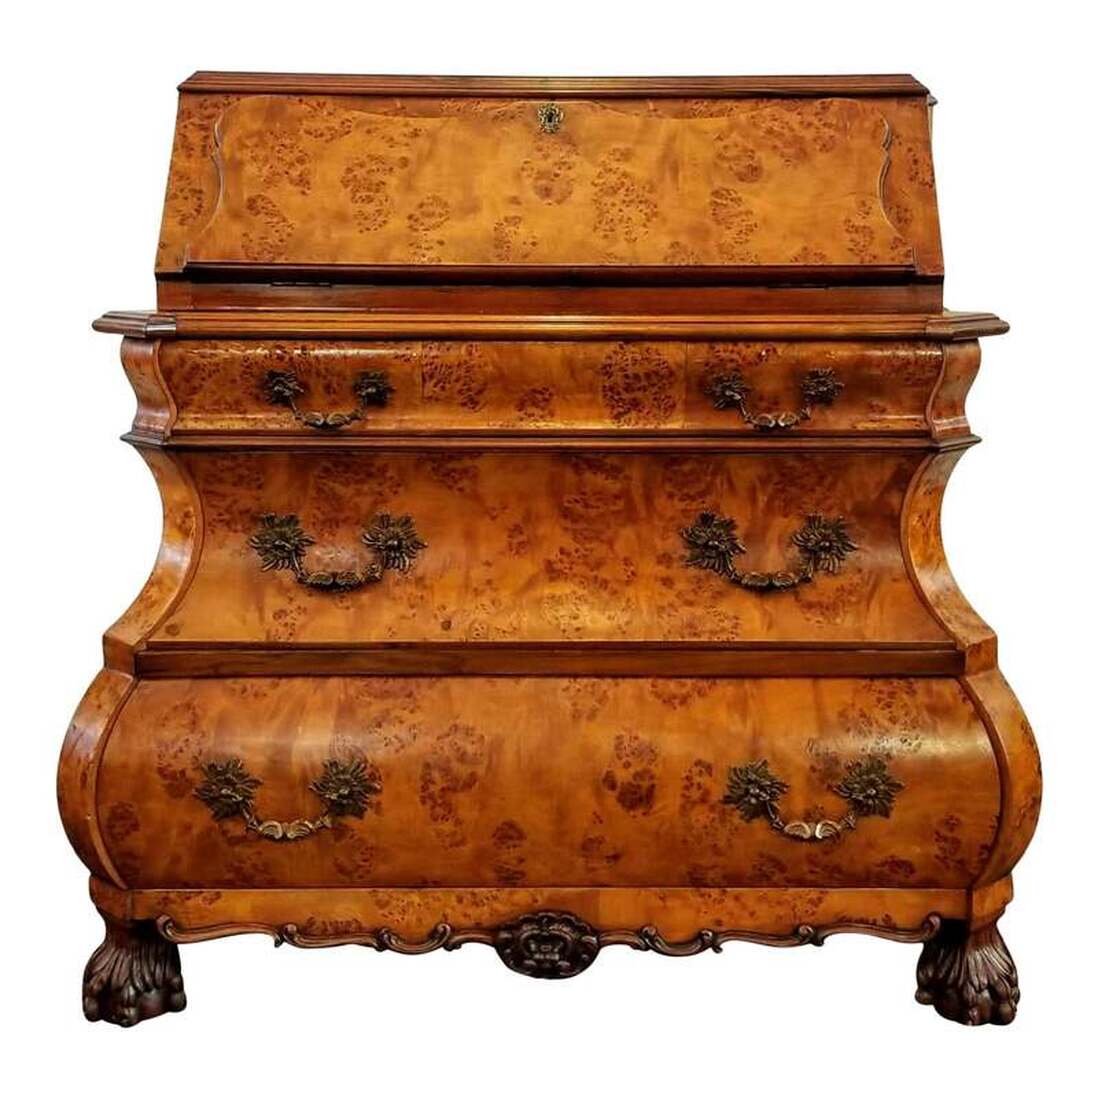 Dutch burr figure walnut wood bombe bureau in the Queen Anne / William and Mary style of the early 18th century.  A cyma curve slant drop front secretary desk is below the shaped top and opens via chased brass hinges to reveal serpentine pigeon holes and two small storage drawers with turned brass knobs. The small interior drawer construction features a nod to the late-17th and early-18th century practice of placing the drawer bottom wood grain front to back. The desk does lock and comes with a key. The key escutcheon features a fan and scroll motif executed in repousse brass.  Below that is a shaped top over cyma curve edged bombe three-drawer chest.  The three shaped drawers open by tugging on the cast brass rocaille bail pulls featuring Flemish scrolls, fans, and fuchsia flower motifs. The bail pull brass scutcheons feature a stylized chrysanthemum motif.  The carved apron at bottom features Flemish scrolls meeting in the center at a foliate cartouche.  The four feet are carved in a mid-to-late Queen Anne period hairy lion paw and ball style.  The back is an oak wood panel.  The desk was made post-World War II, in the 1950s and is a recreation of early-18th century styles popular during the William and Mary, Queen Anne, and Early Georgian periods. The bureau is very well constructed.  SIZE:  44